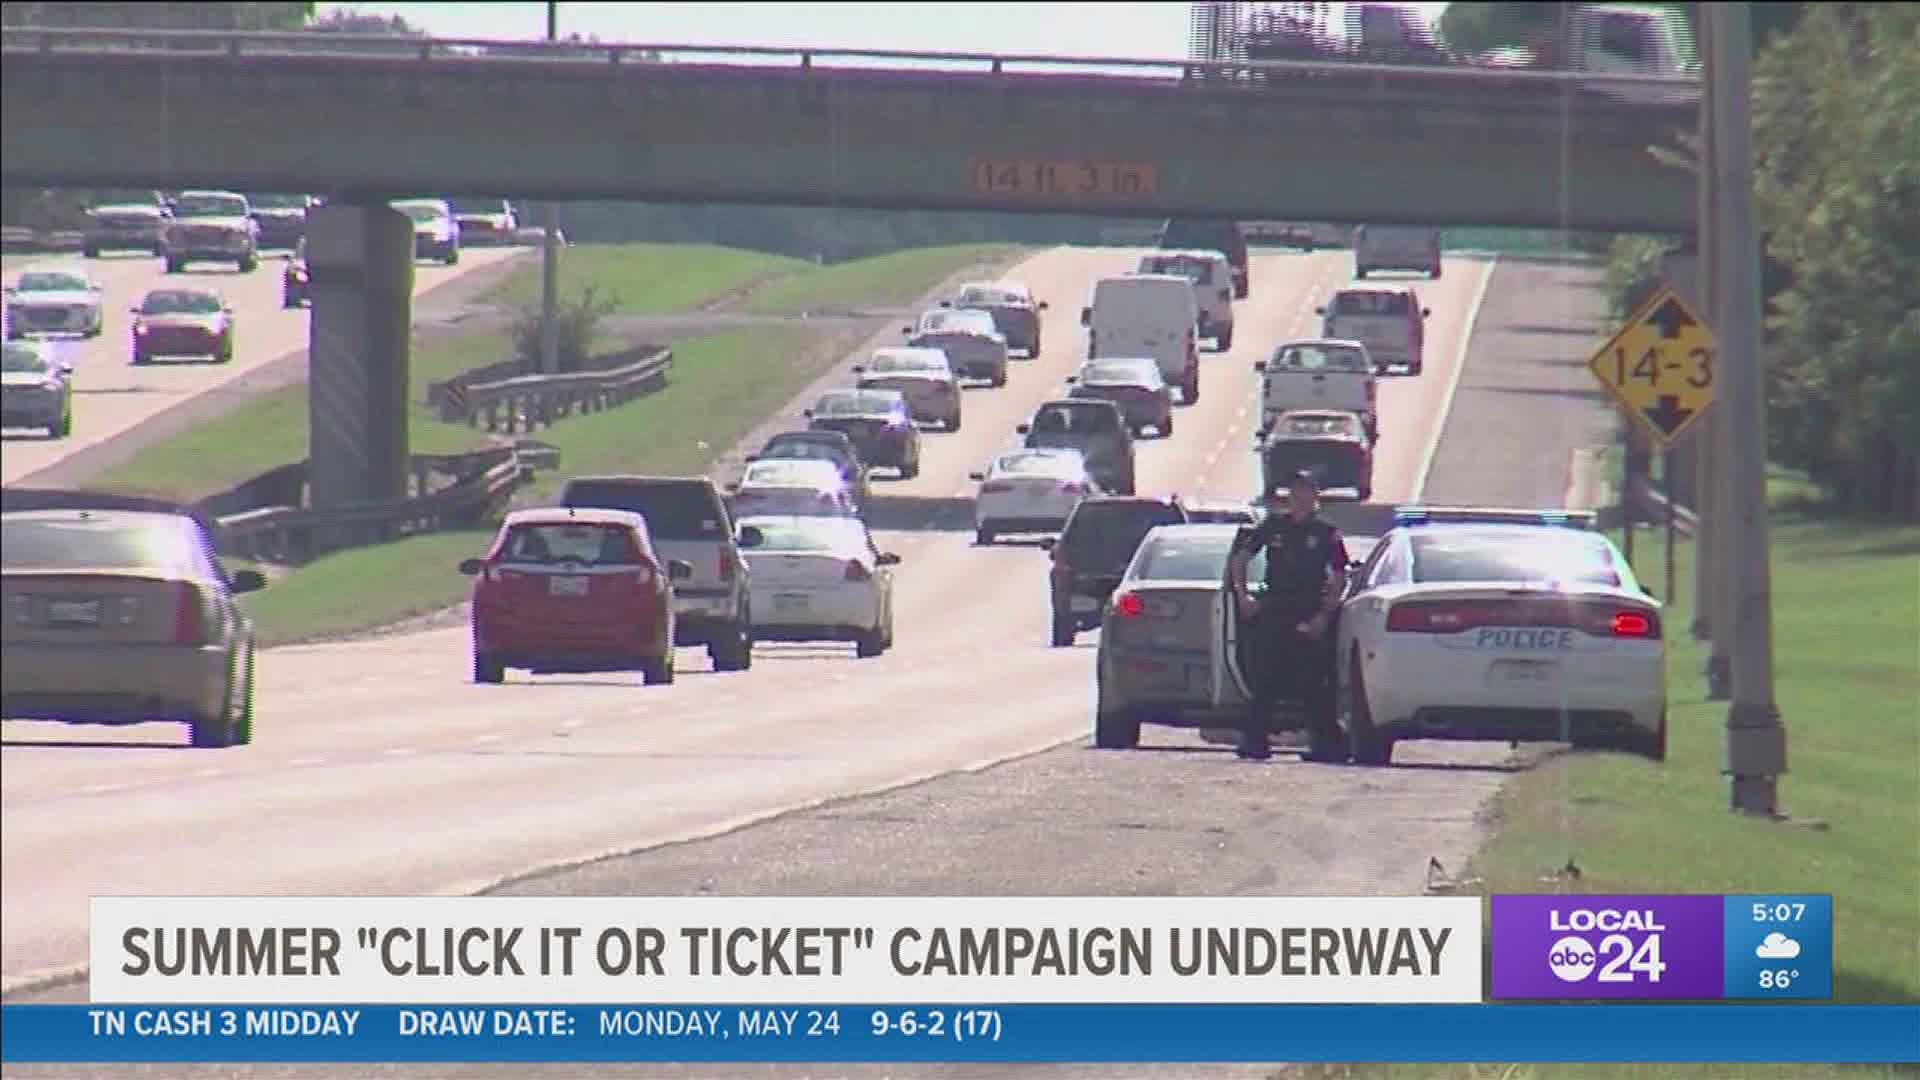 The Click It or Ticket campaign will last through June 6th.